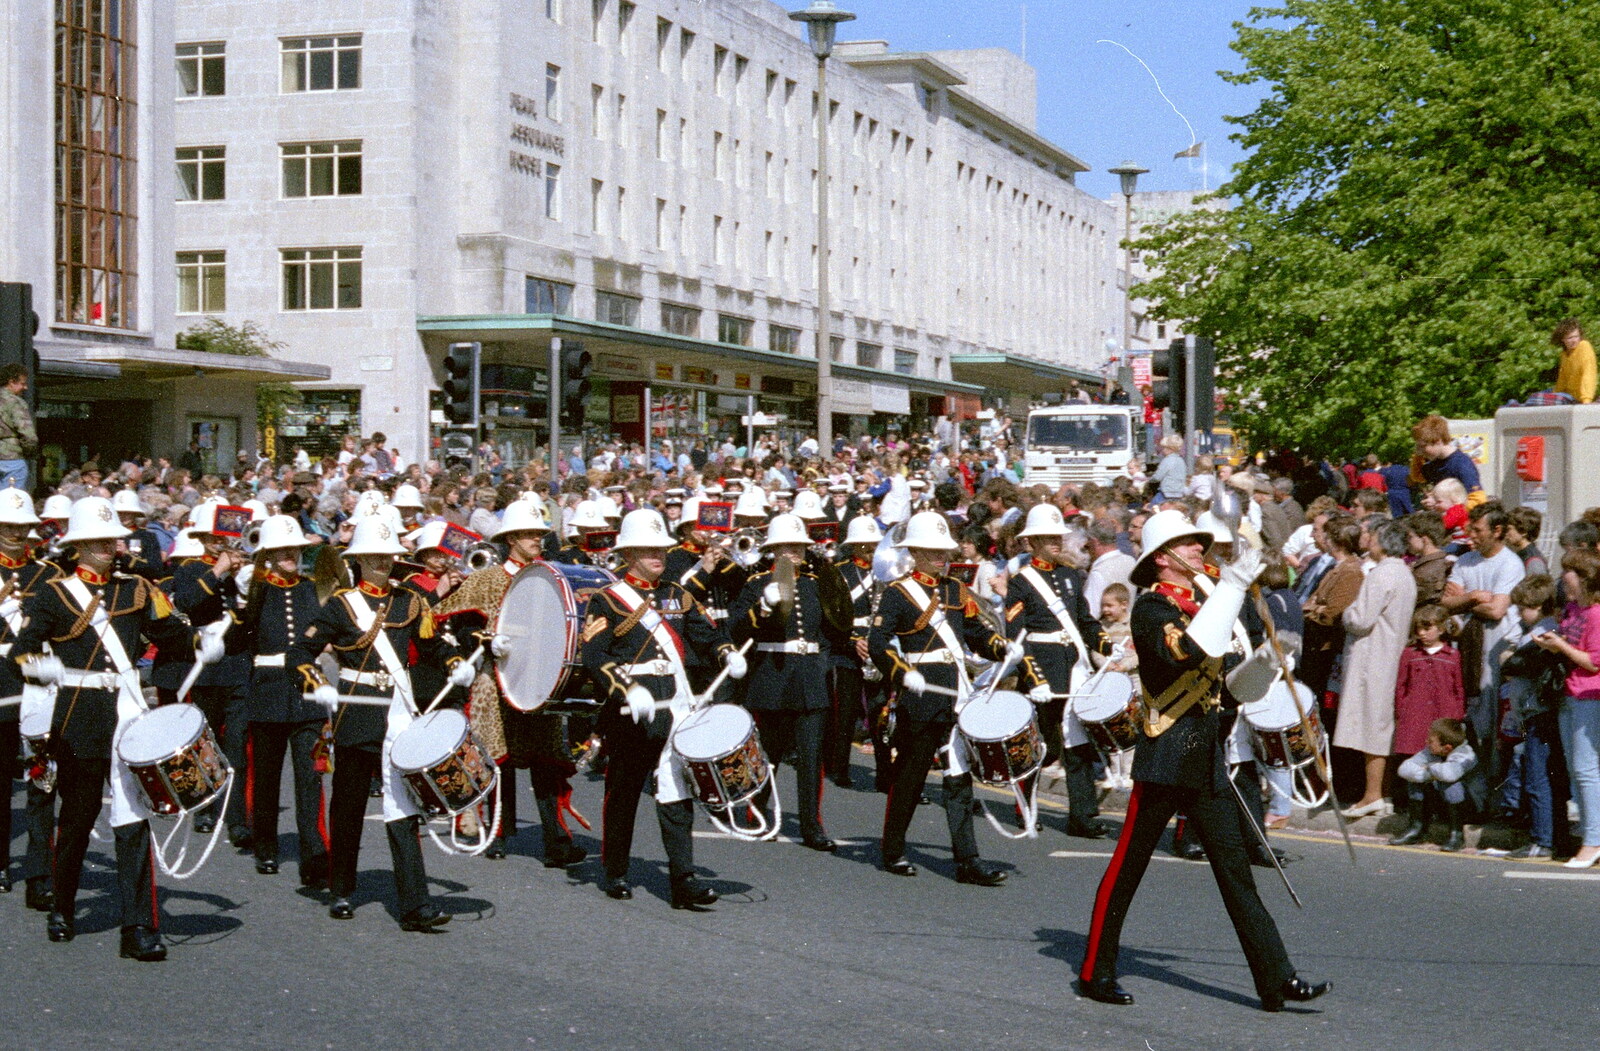 The Royal Marines marching band from Uni: The Lord Mayor's Procession, Plymouth, Devon - 21st May 1986